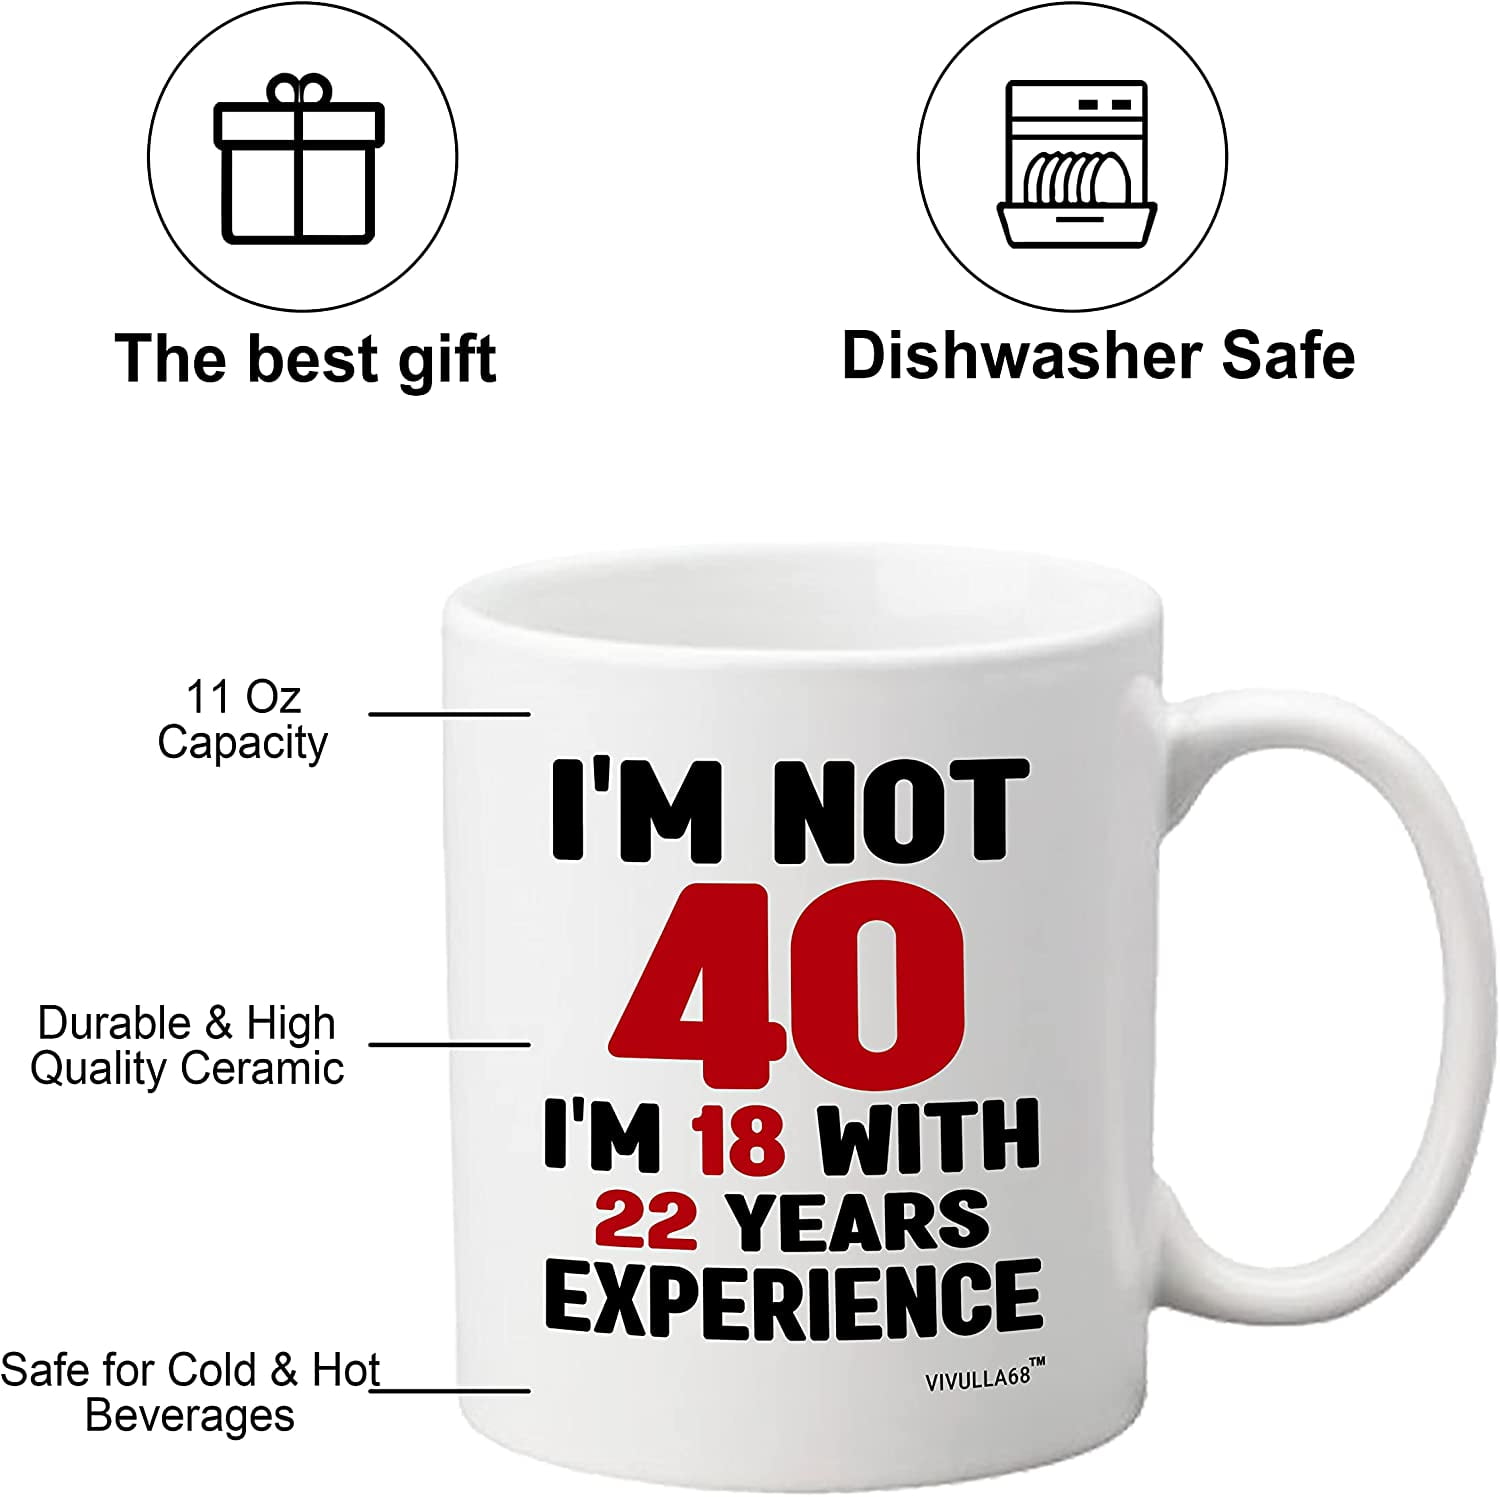 Does looking at expensive heated mugs (who else forgets about hot drinks)  while having 40+ items in your basket you will definitely not buy sound  familiar or is it just me?! 